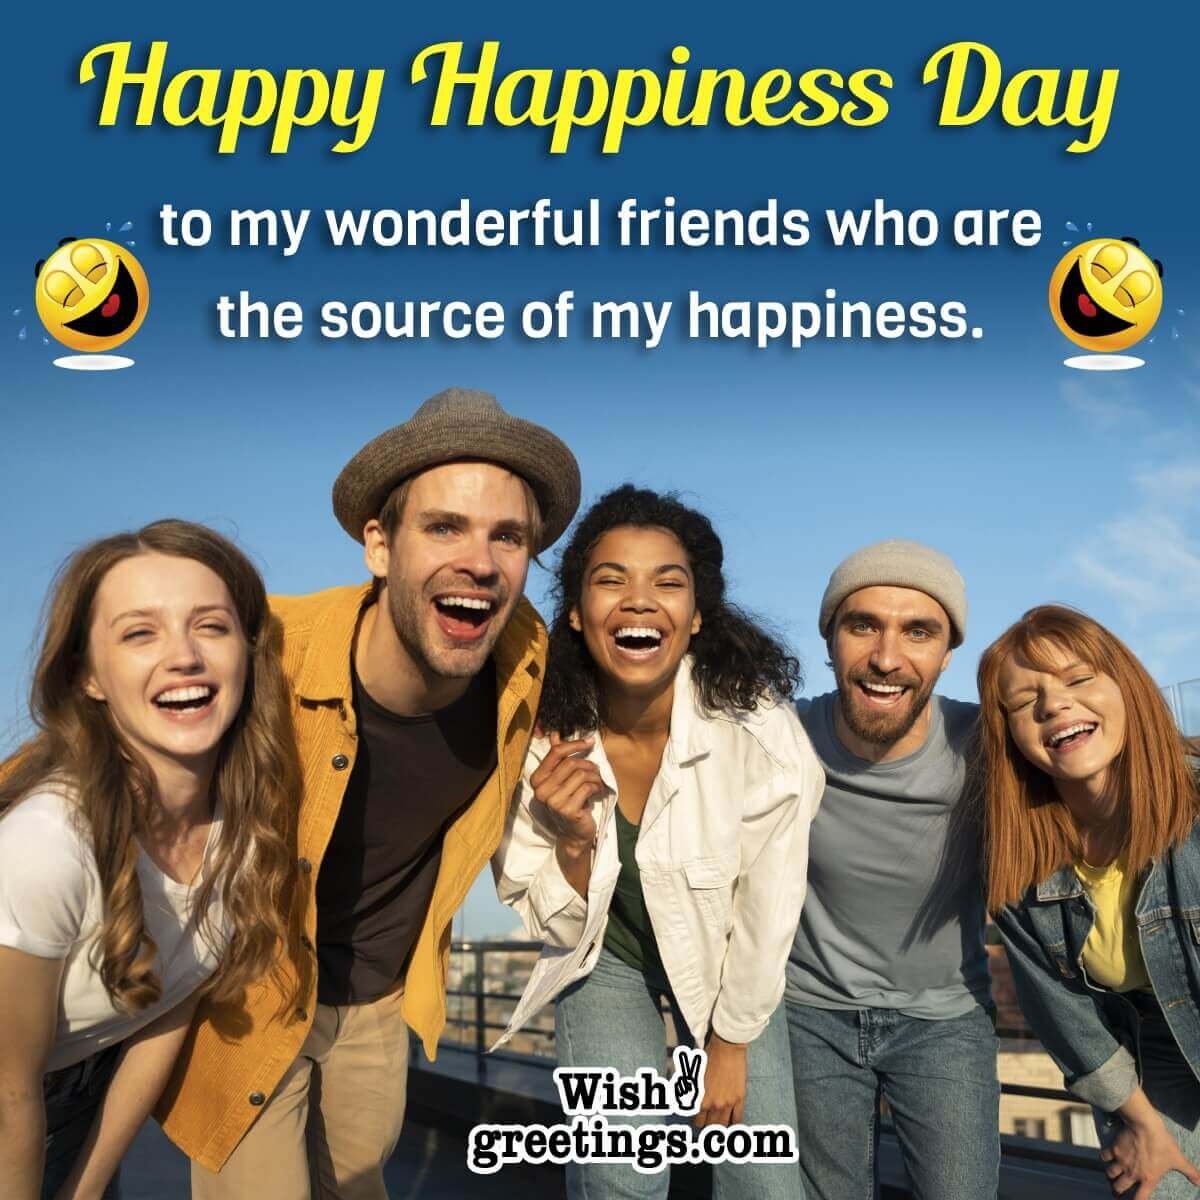 Happy Happiness Day Message Pic For Friends